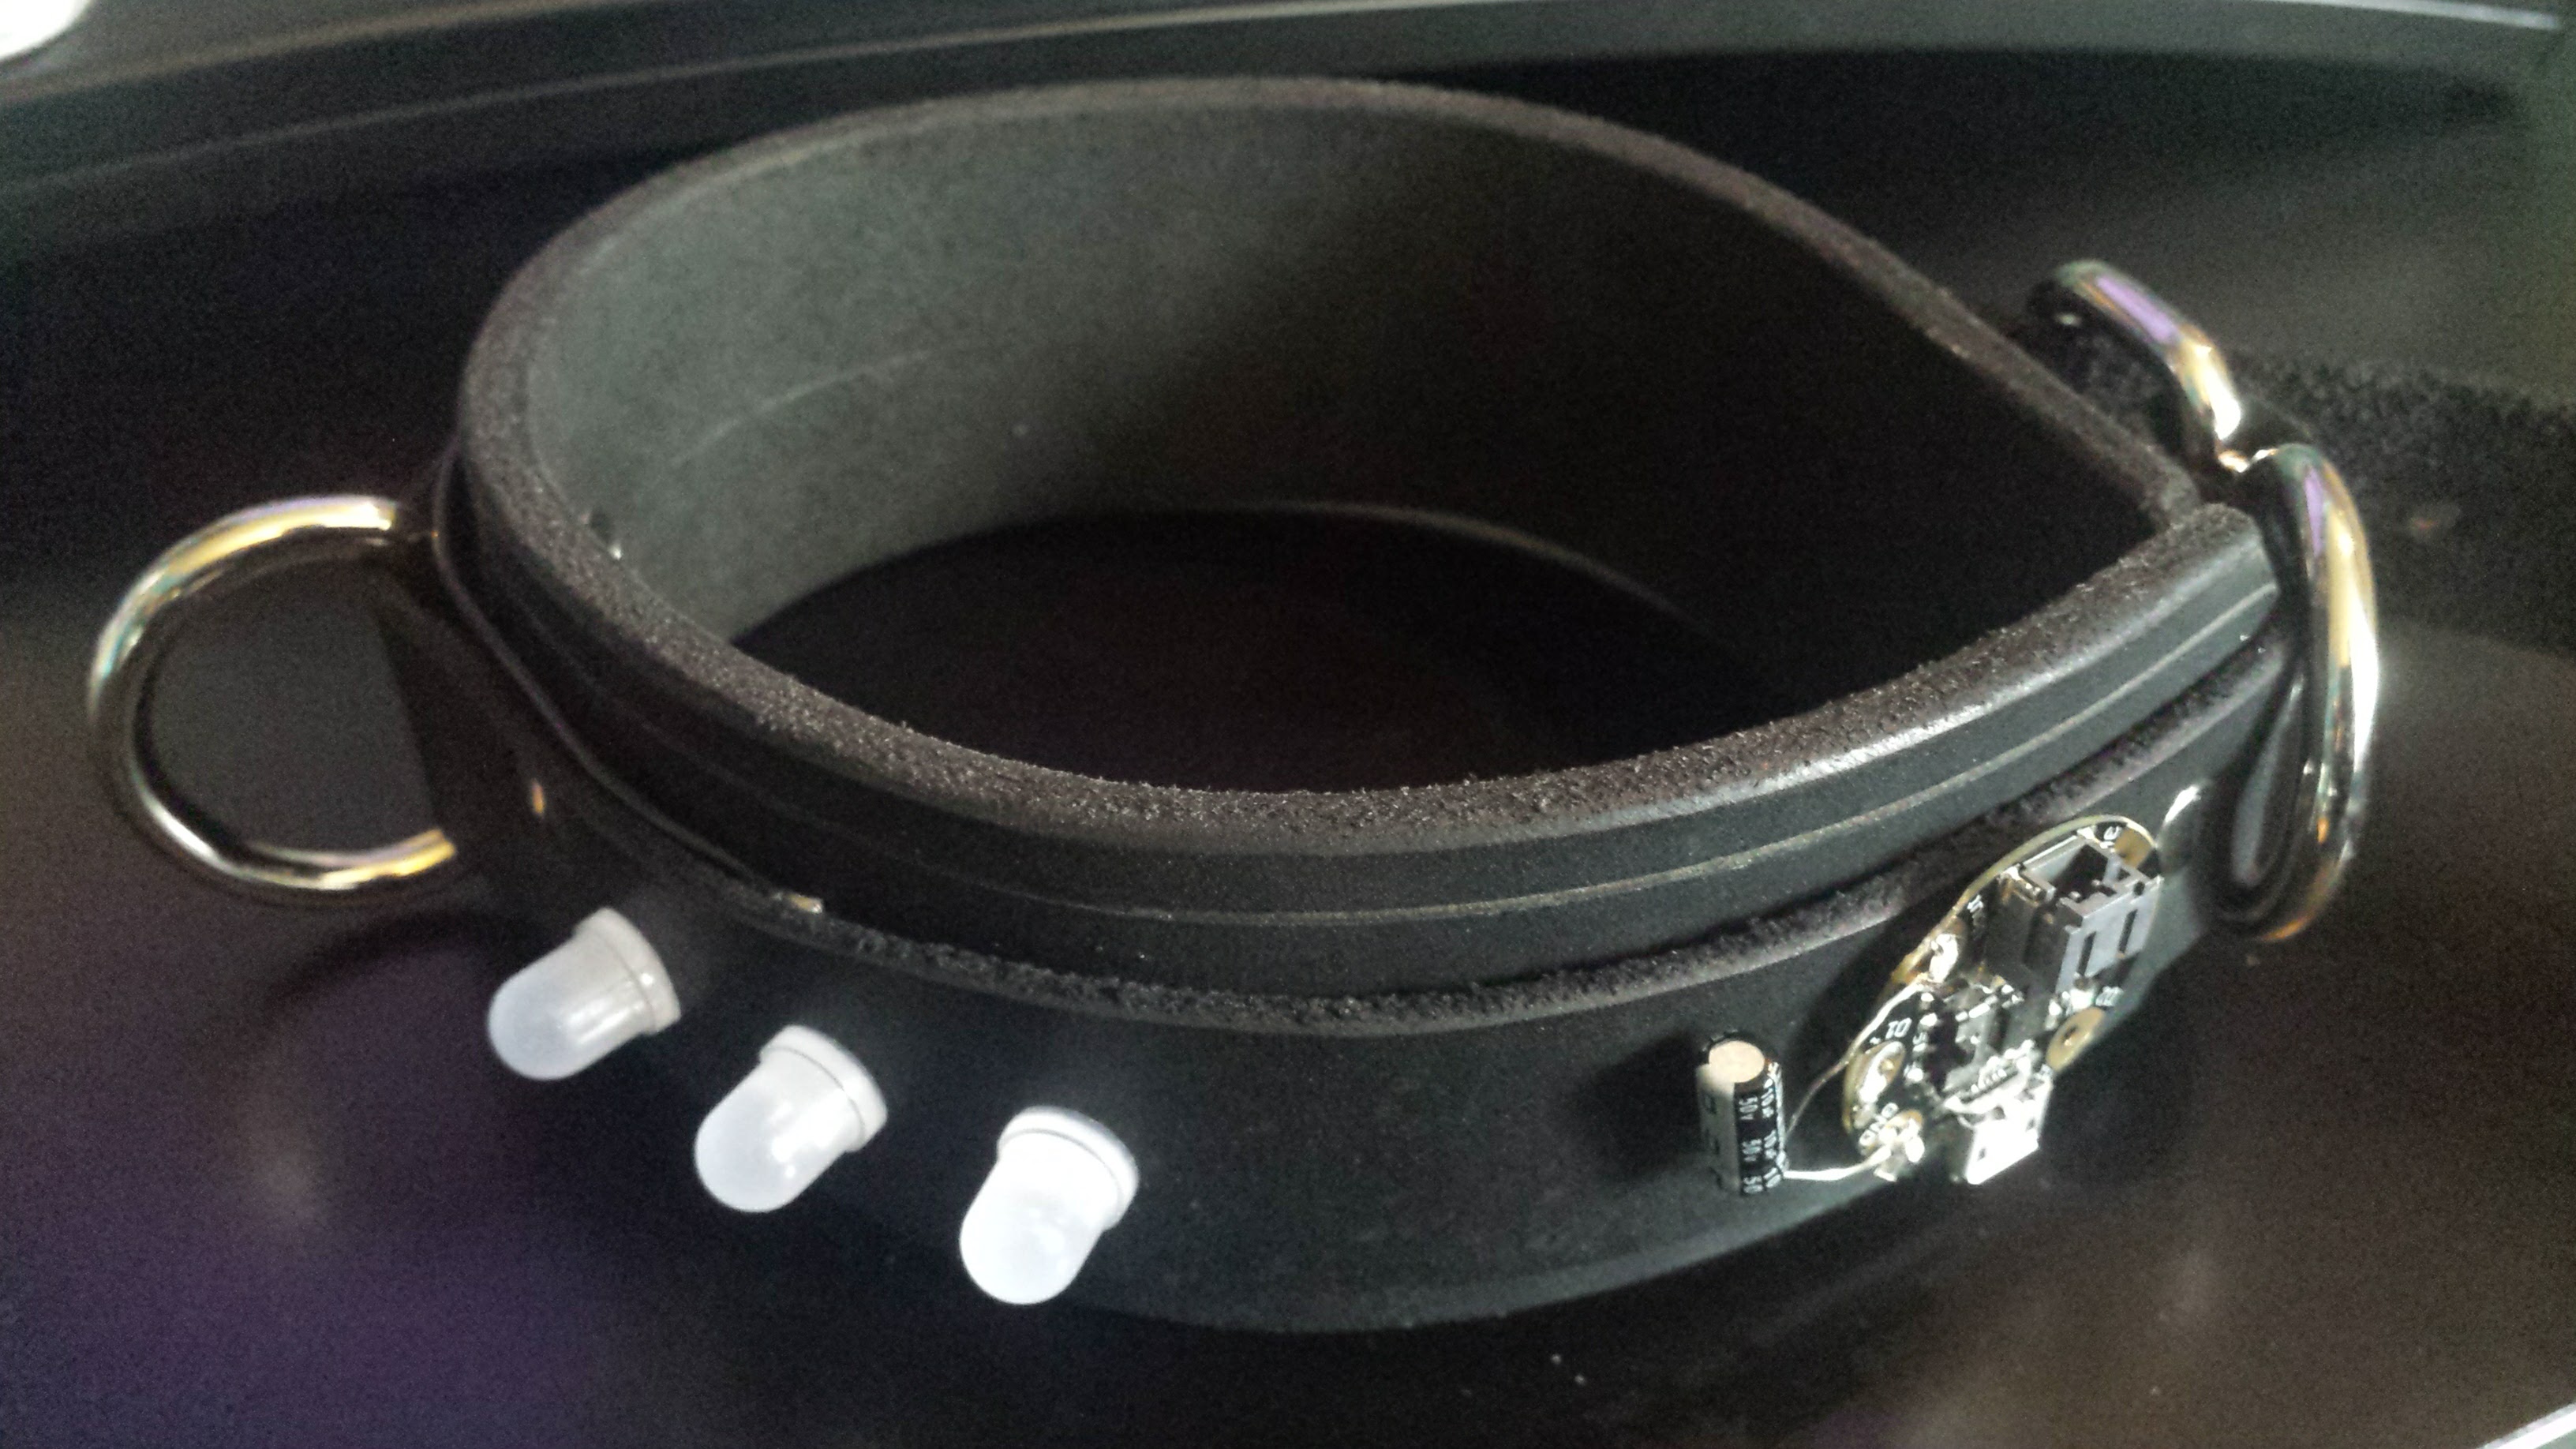 A leather collar with a D ring in the front.  LEDs have been mounted on the collar. and a small microcontroller has been mounted near the buckle